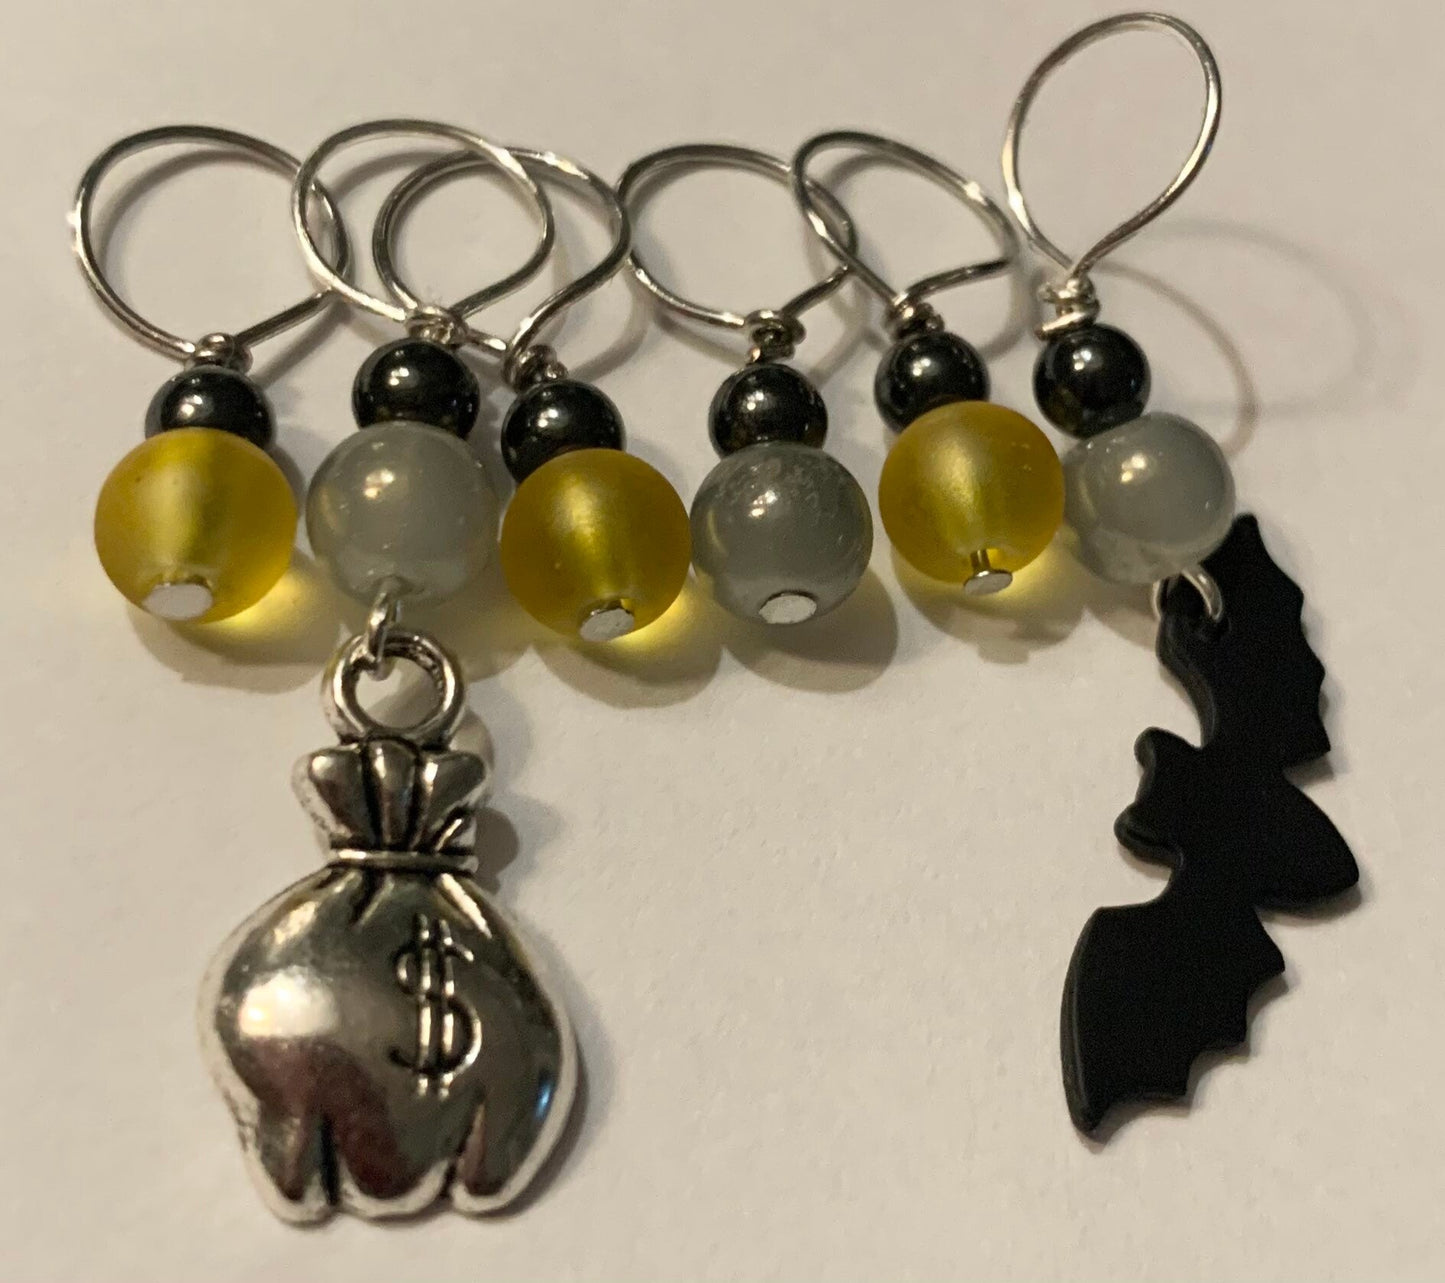 The other Billionaire Playboy Stitch Markers